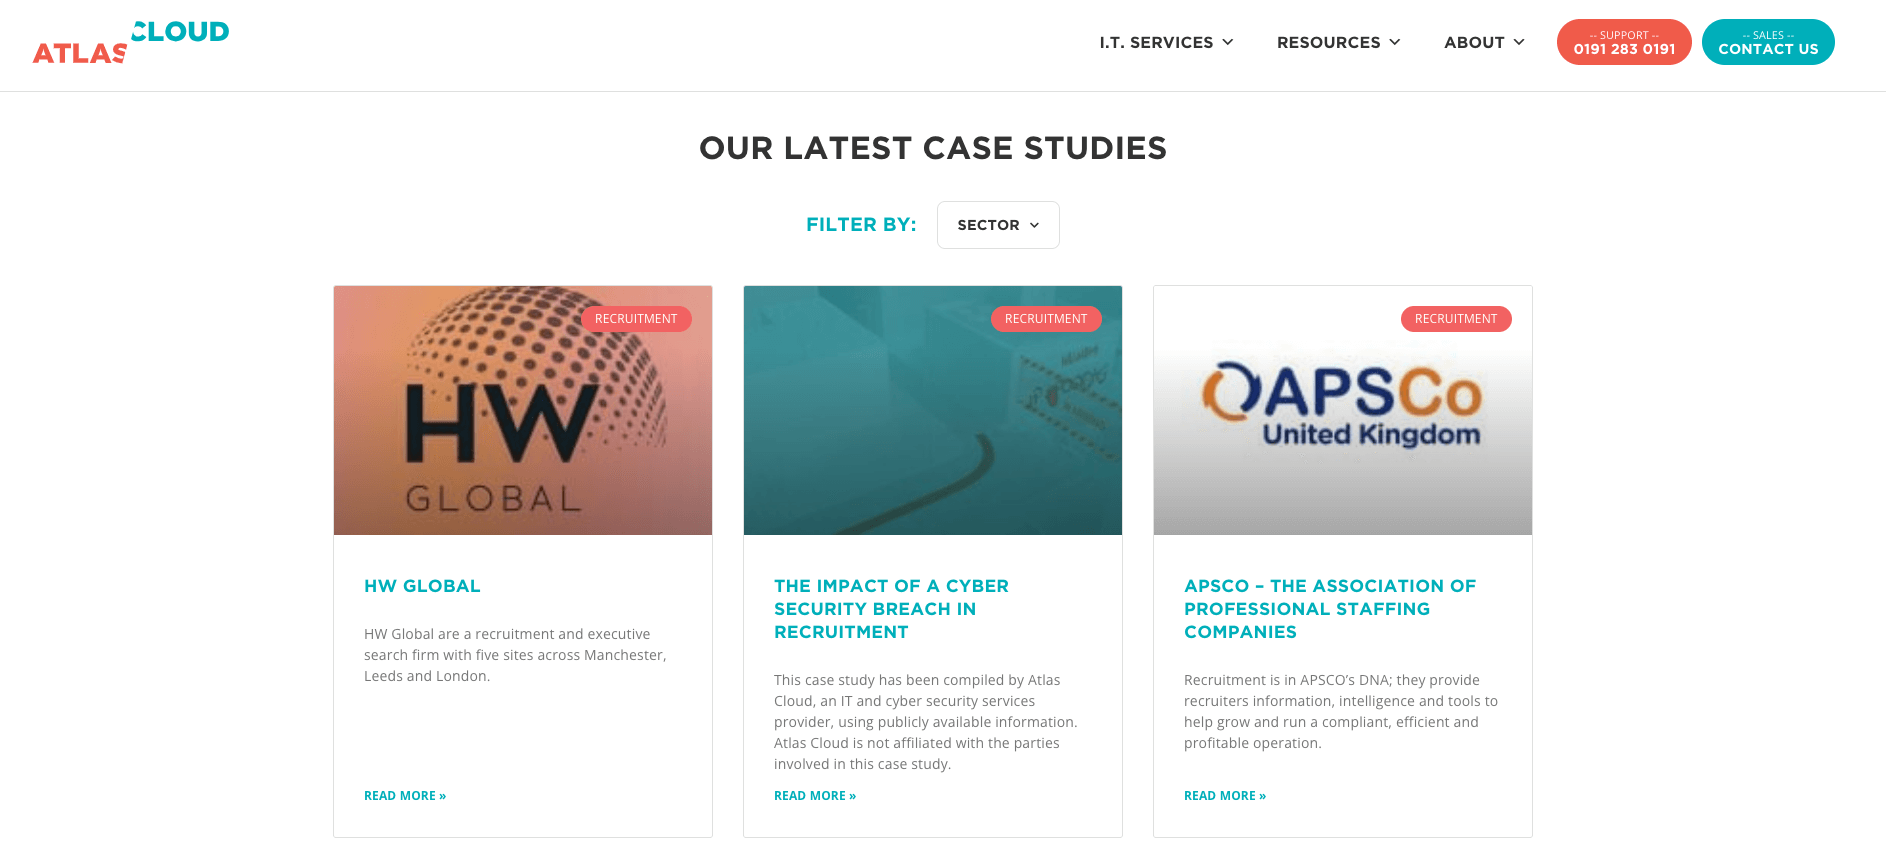 "Our latest case studies" webpage. 